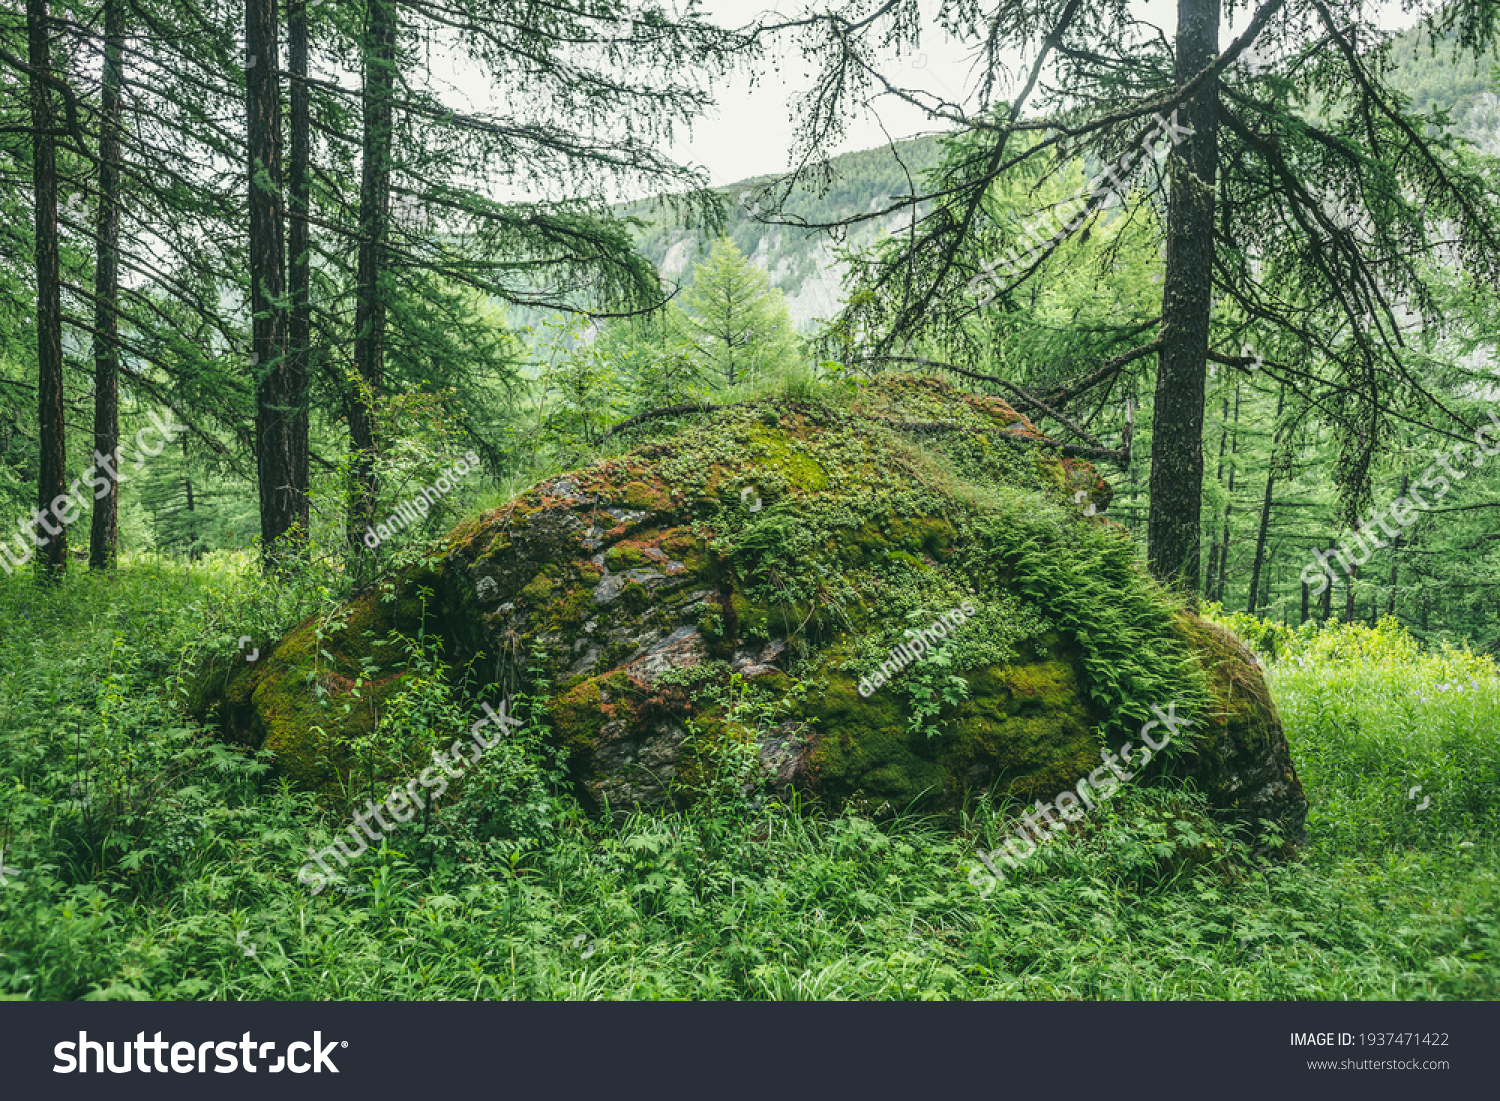 Scenic forest landscape with big mossy stone with green grasses among thickets and trees. Vivid scenery with large boulder with moses and lush vegetation. Green rock with moss and wild flora in forest #1937471422